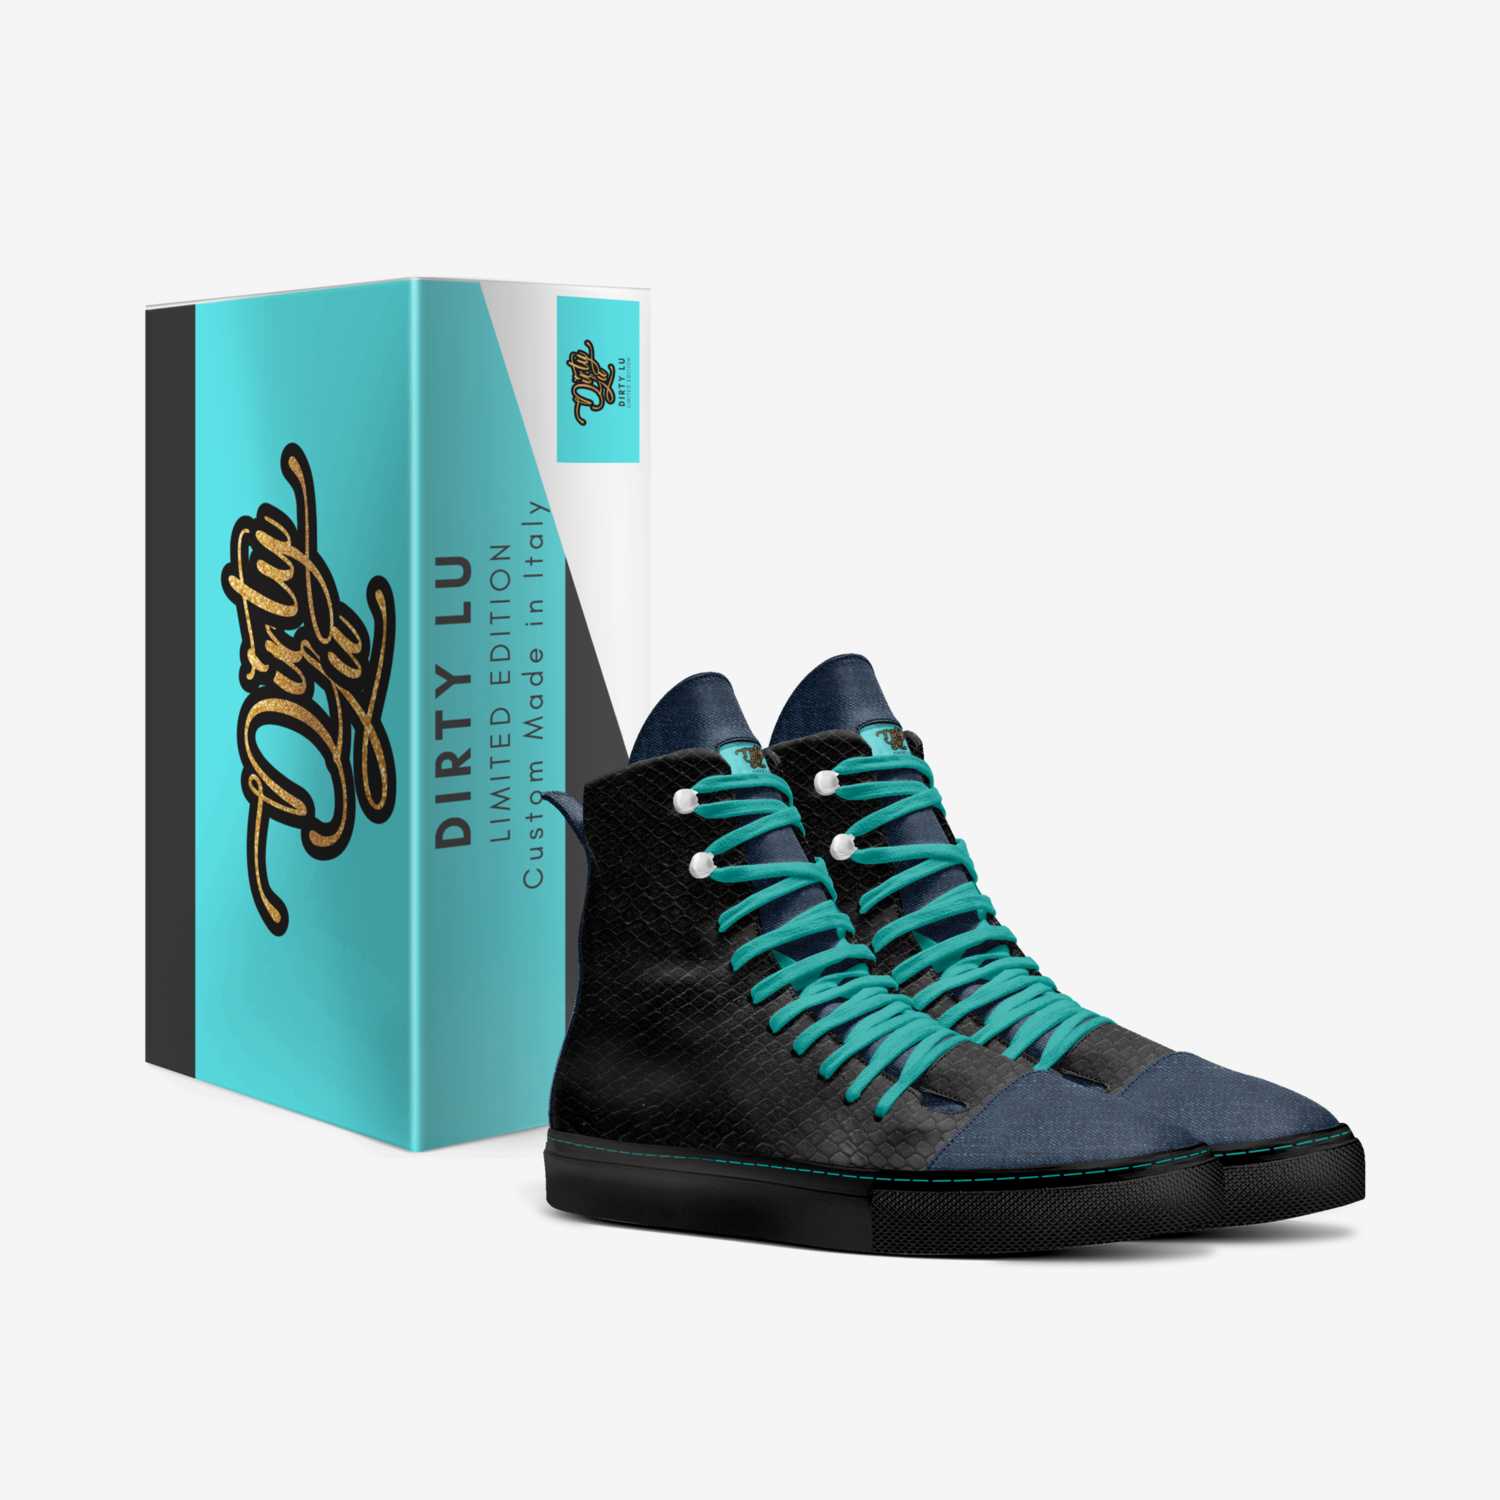 Dirty Lu custom made in Italy shoes by Luan Heslin | Box view